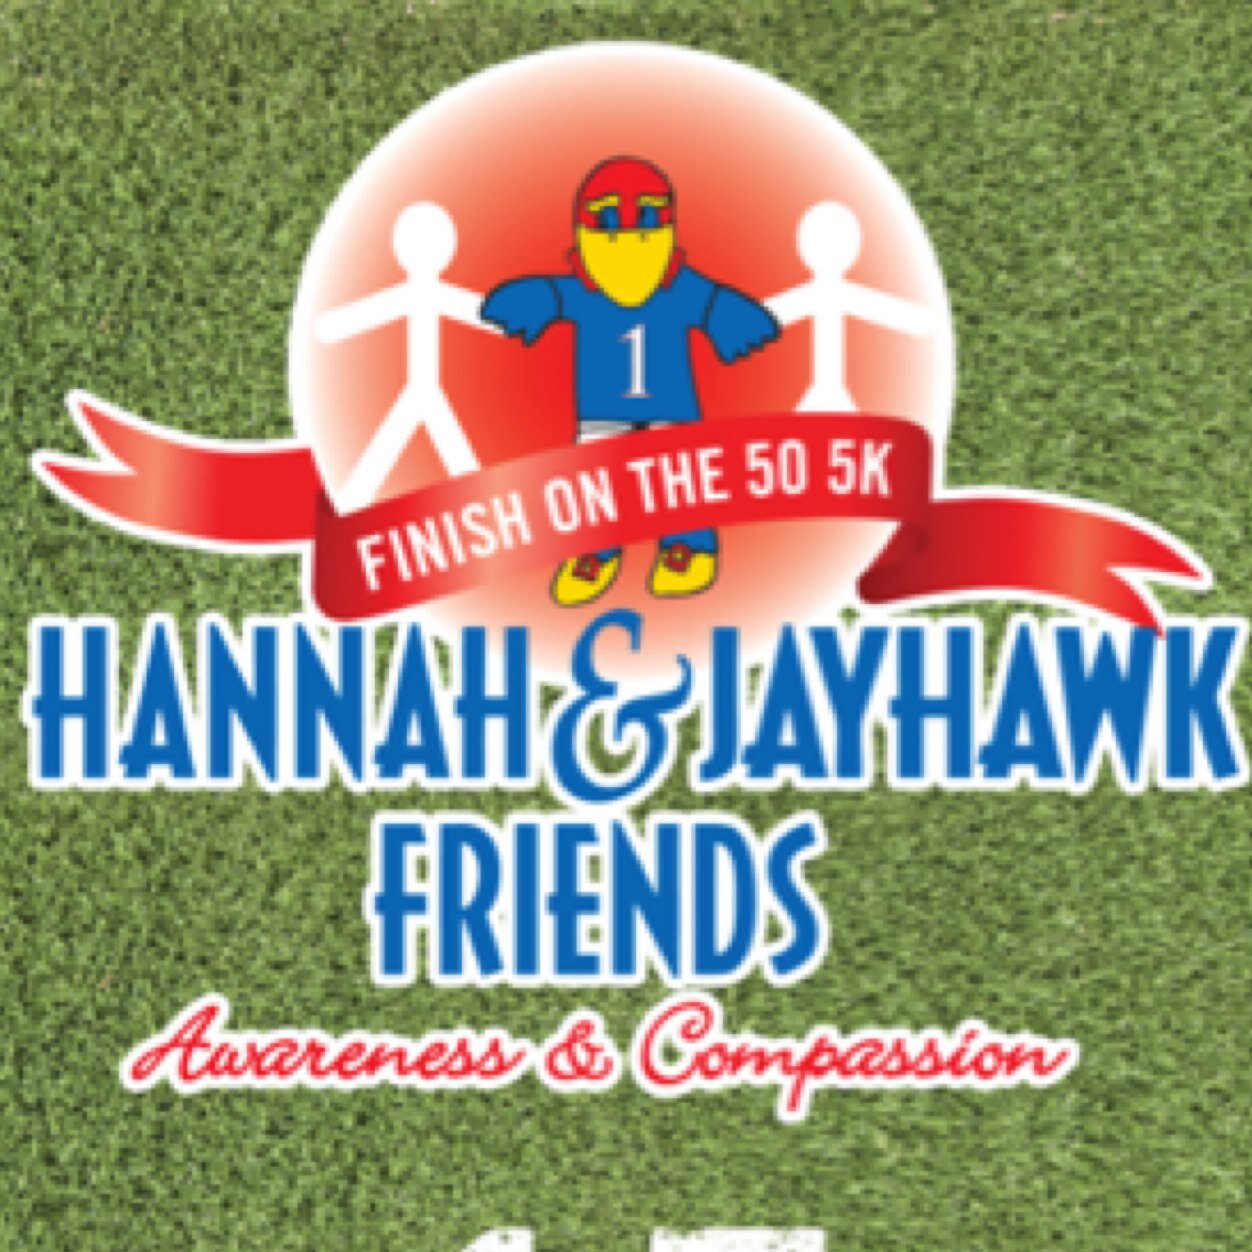 Hannah & Jayhawk Friends is a student organization at the University of Kansas  working to improve the quality of life for individuals with special needs. RCJH!